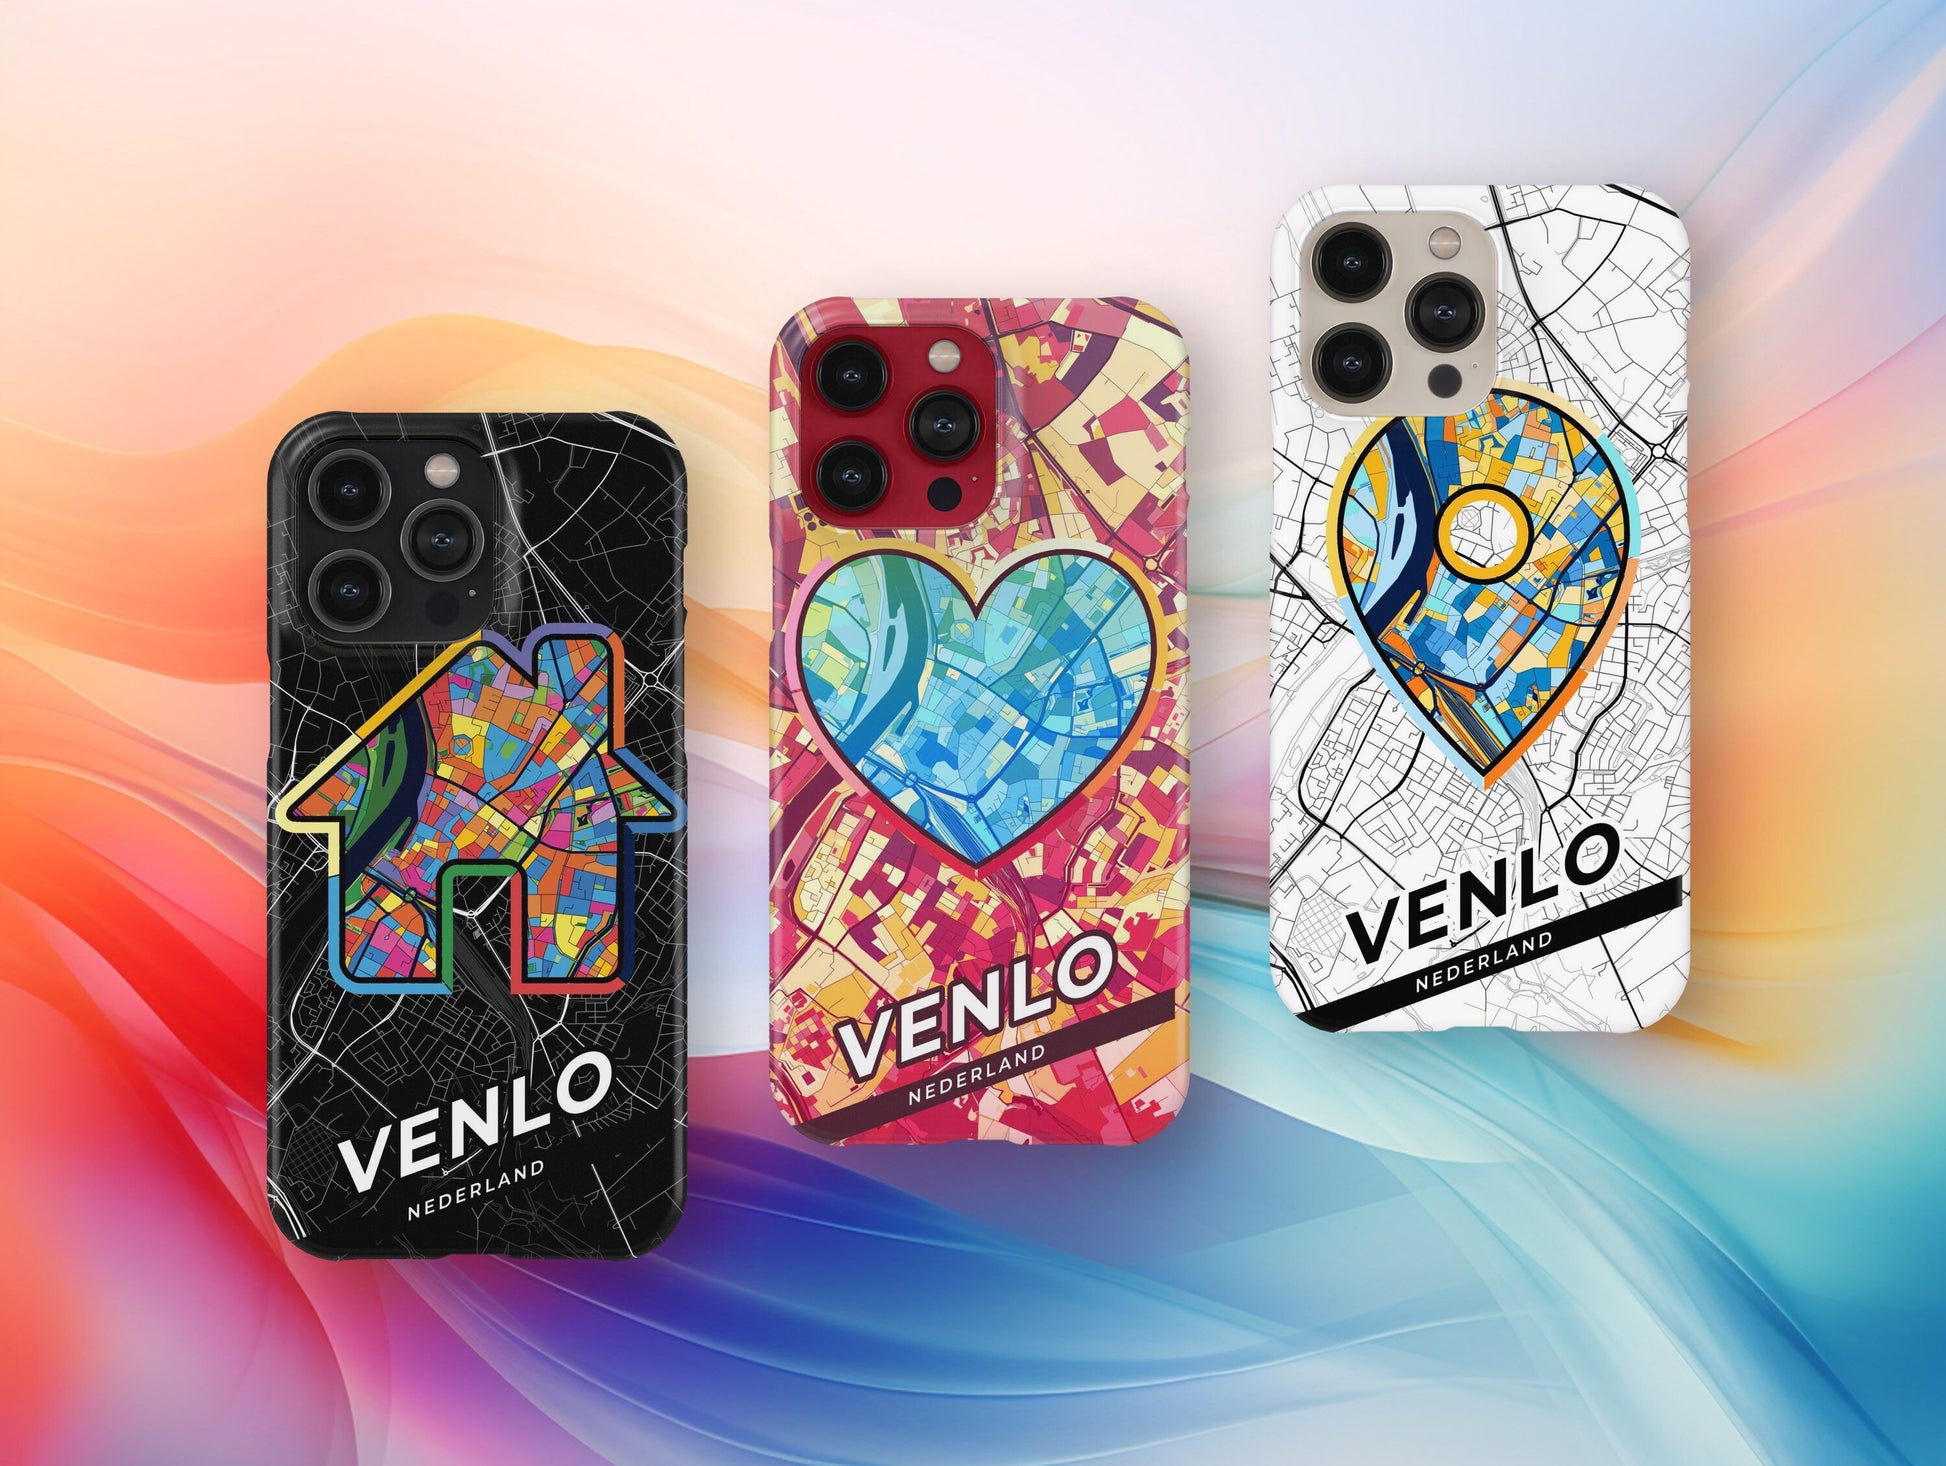 Venlo Netherlands slim phone case with colorful icon